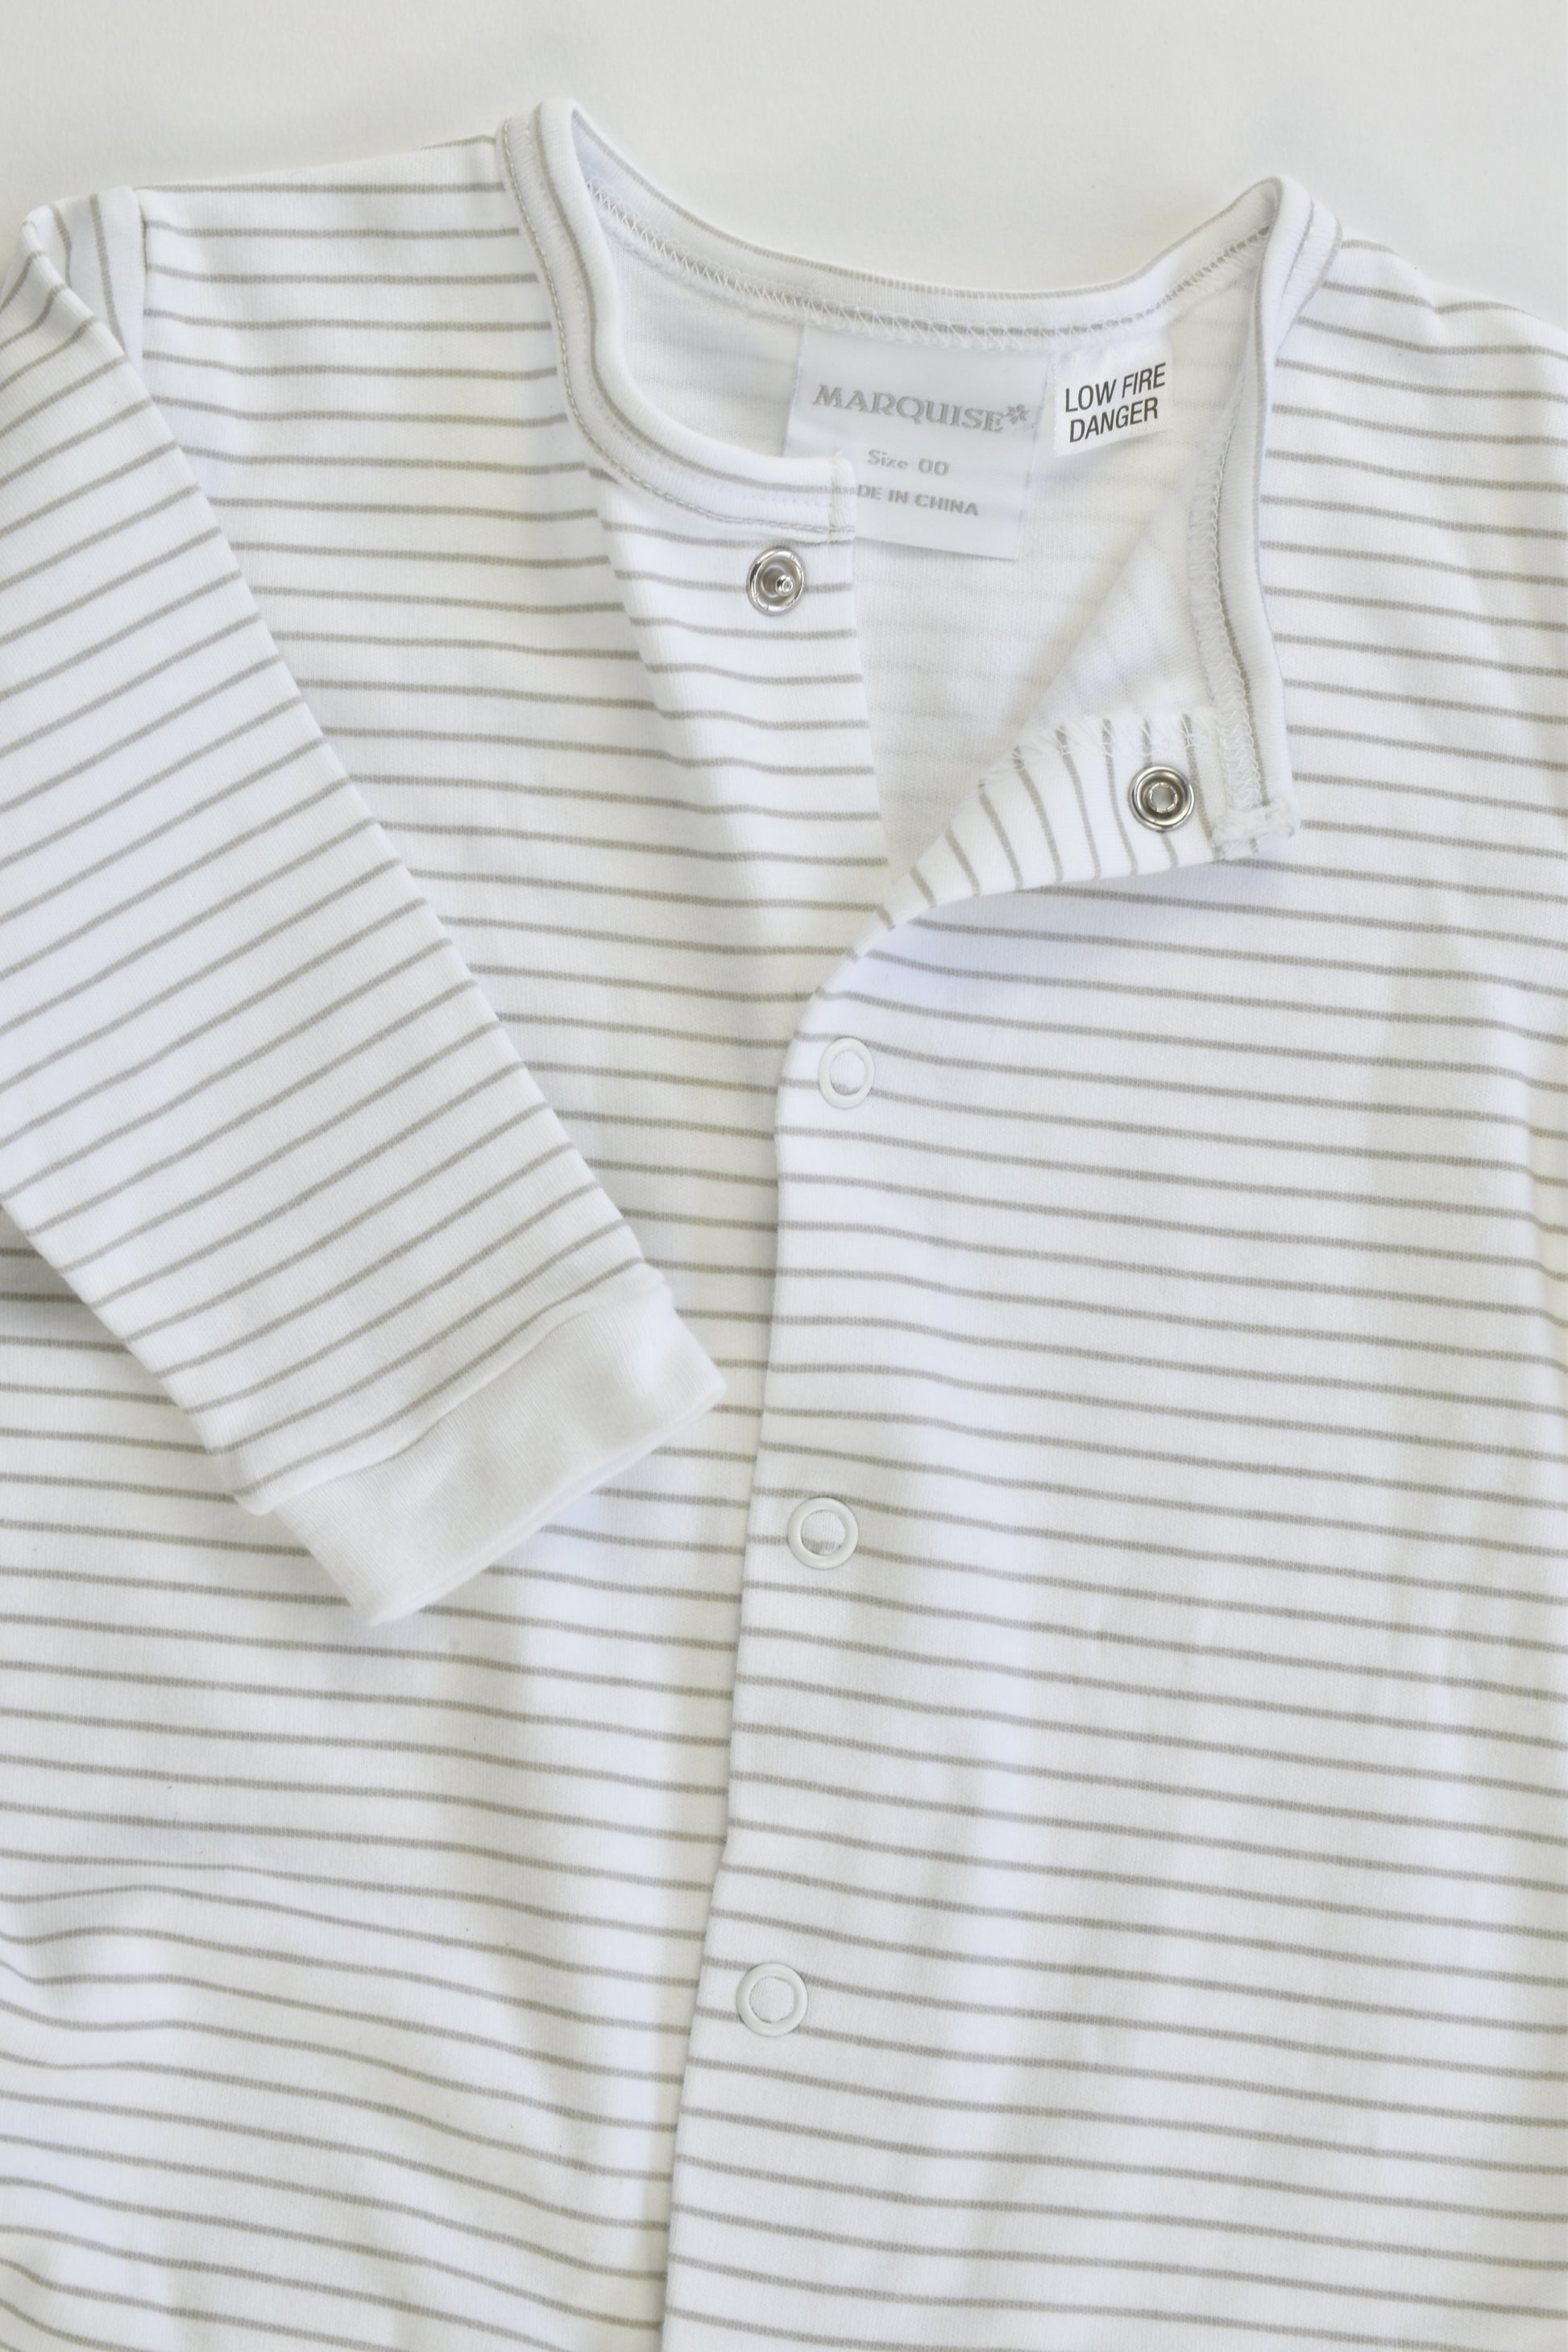 NEW Marquise Size 00 (3-6 months) Striped Footed Romper